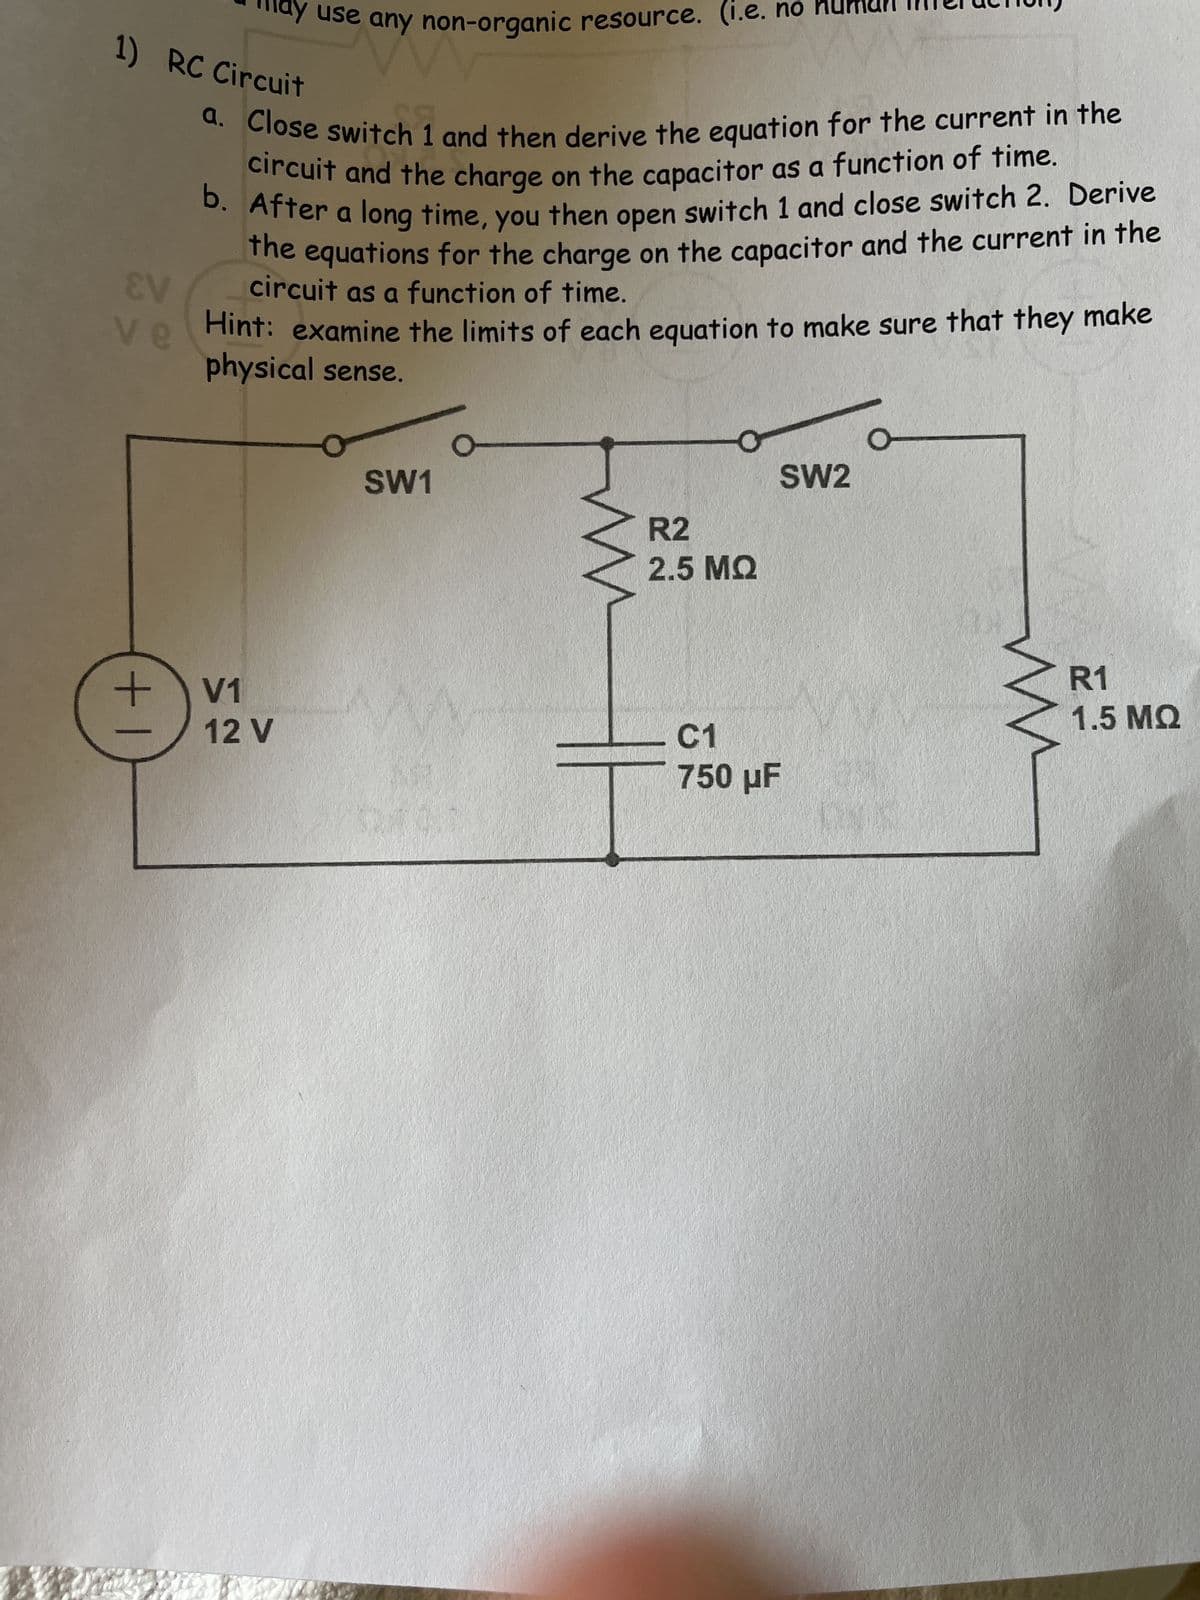 +
may use any non-organic resource. (i.e. no huma
zany no
1) RC Circuit
EV
ve
a. Close switch 1 and then derive the equation for the current in the
circuit and the charge on the capacitor as a function of time.
b. After a long time, you then open switch 1 and close switch 2. Derive
the equations for the charge on the capacitor and the current in the
circuit as a function of time.
Hint: examine the limits of each equation to make sure that they make
physical sense.
V1
12 V
SW1
w
R2
2.5 ΜΩ
C1
750 μF
SW2
ww
R1
1.5 MQ